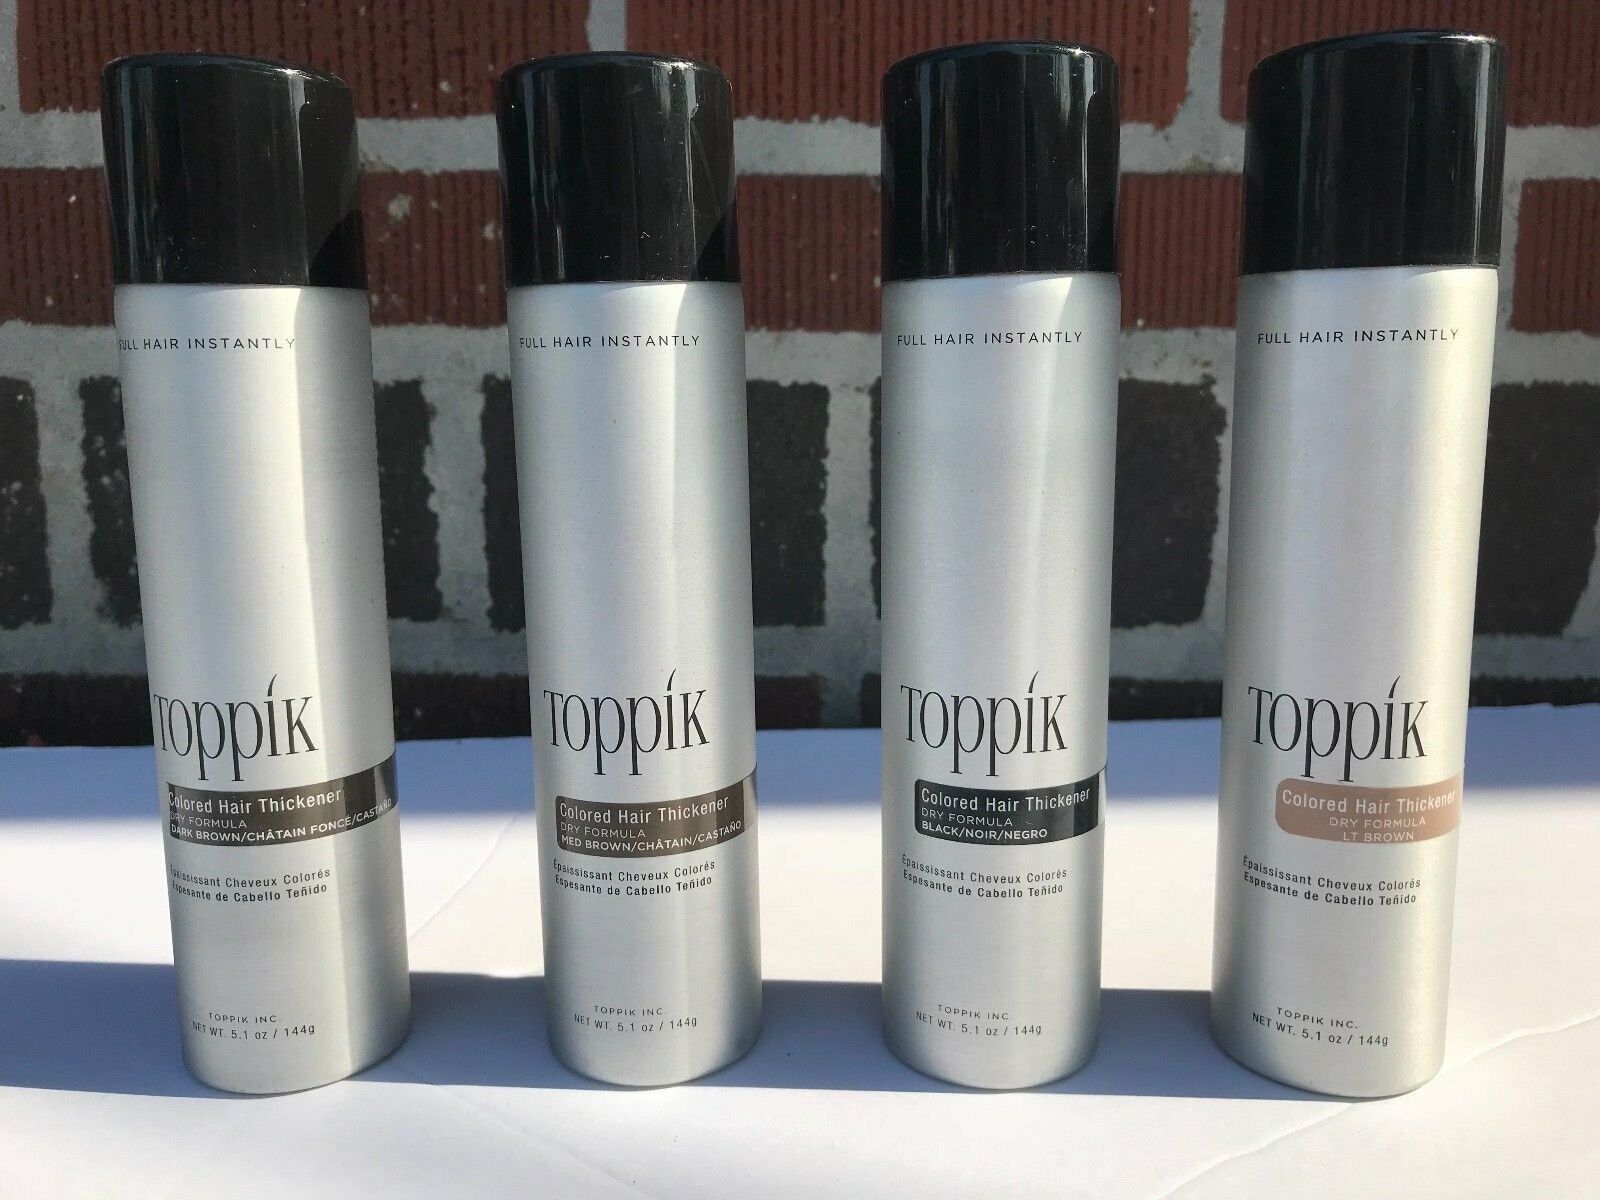 Toppik Fullmore Colored Hair Spray Thickener  oz / 144g Choose Your Color  | eBay